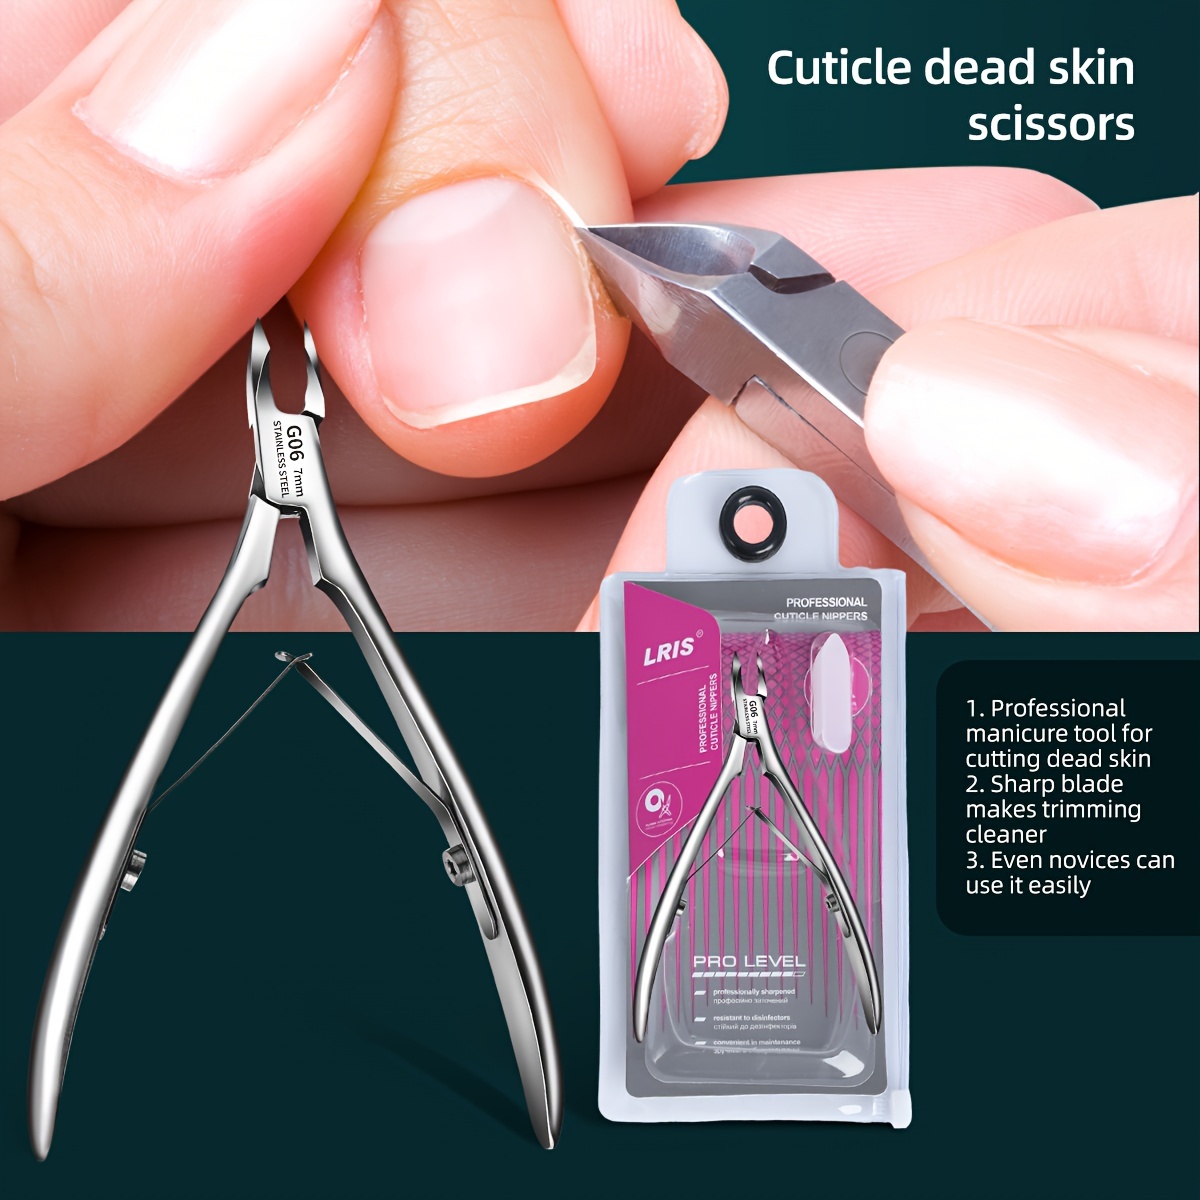 

Professional G06 Stainless Steel Cuticle Scissors: Precise Trimming For Nail Care - Double Spring, Sharp Blade, Easy To Use - Suitable For Foot, Hand, And Nail Care